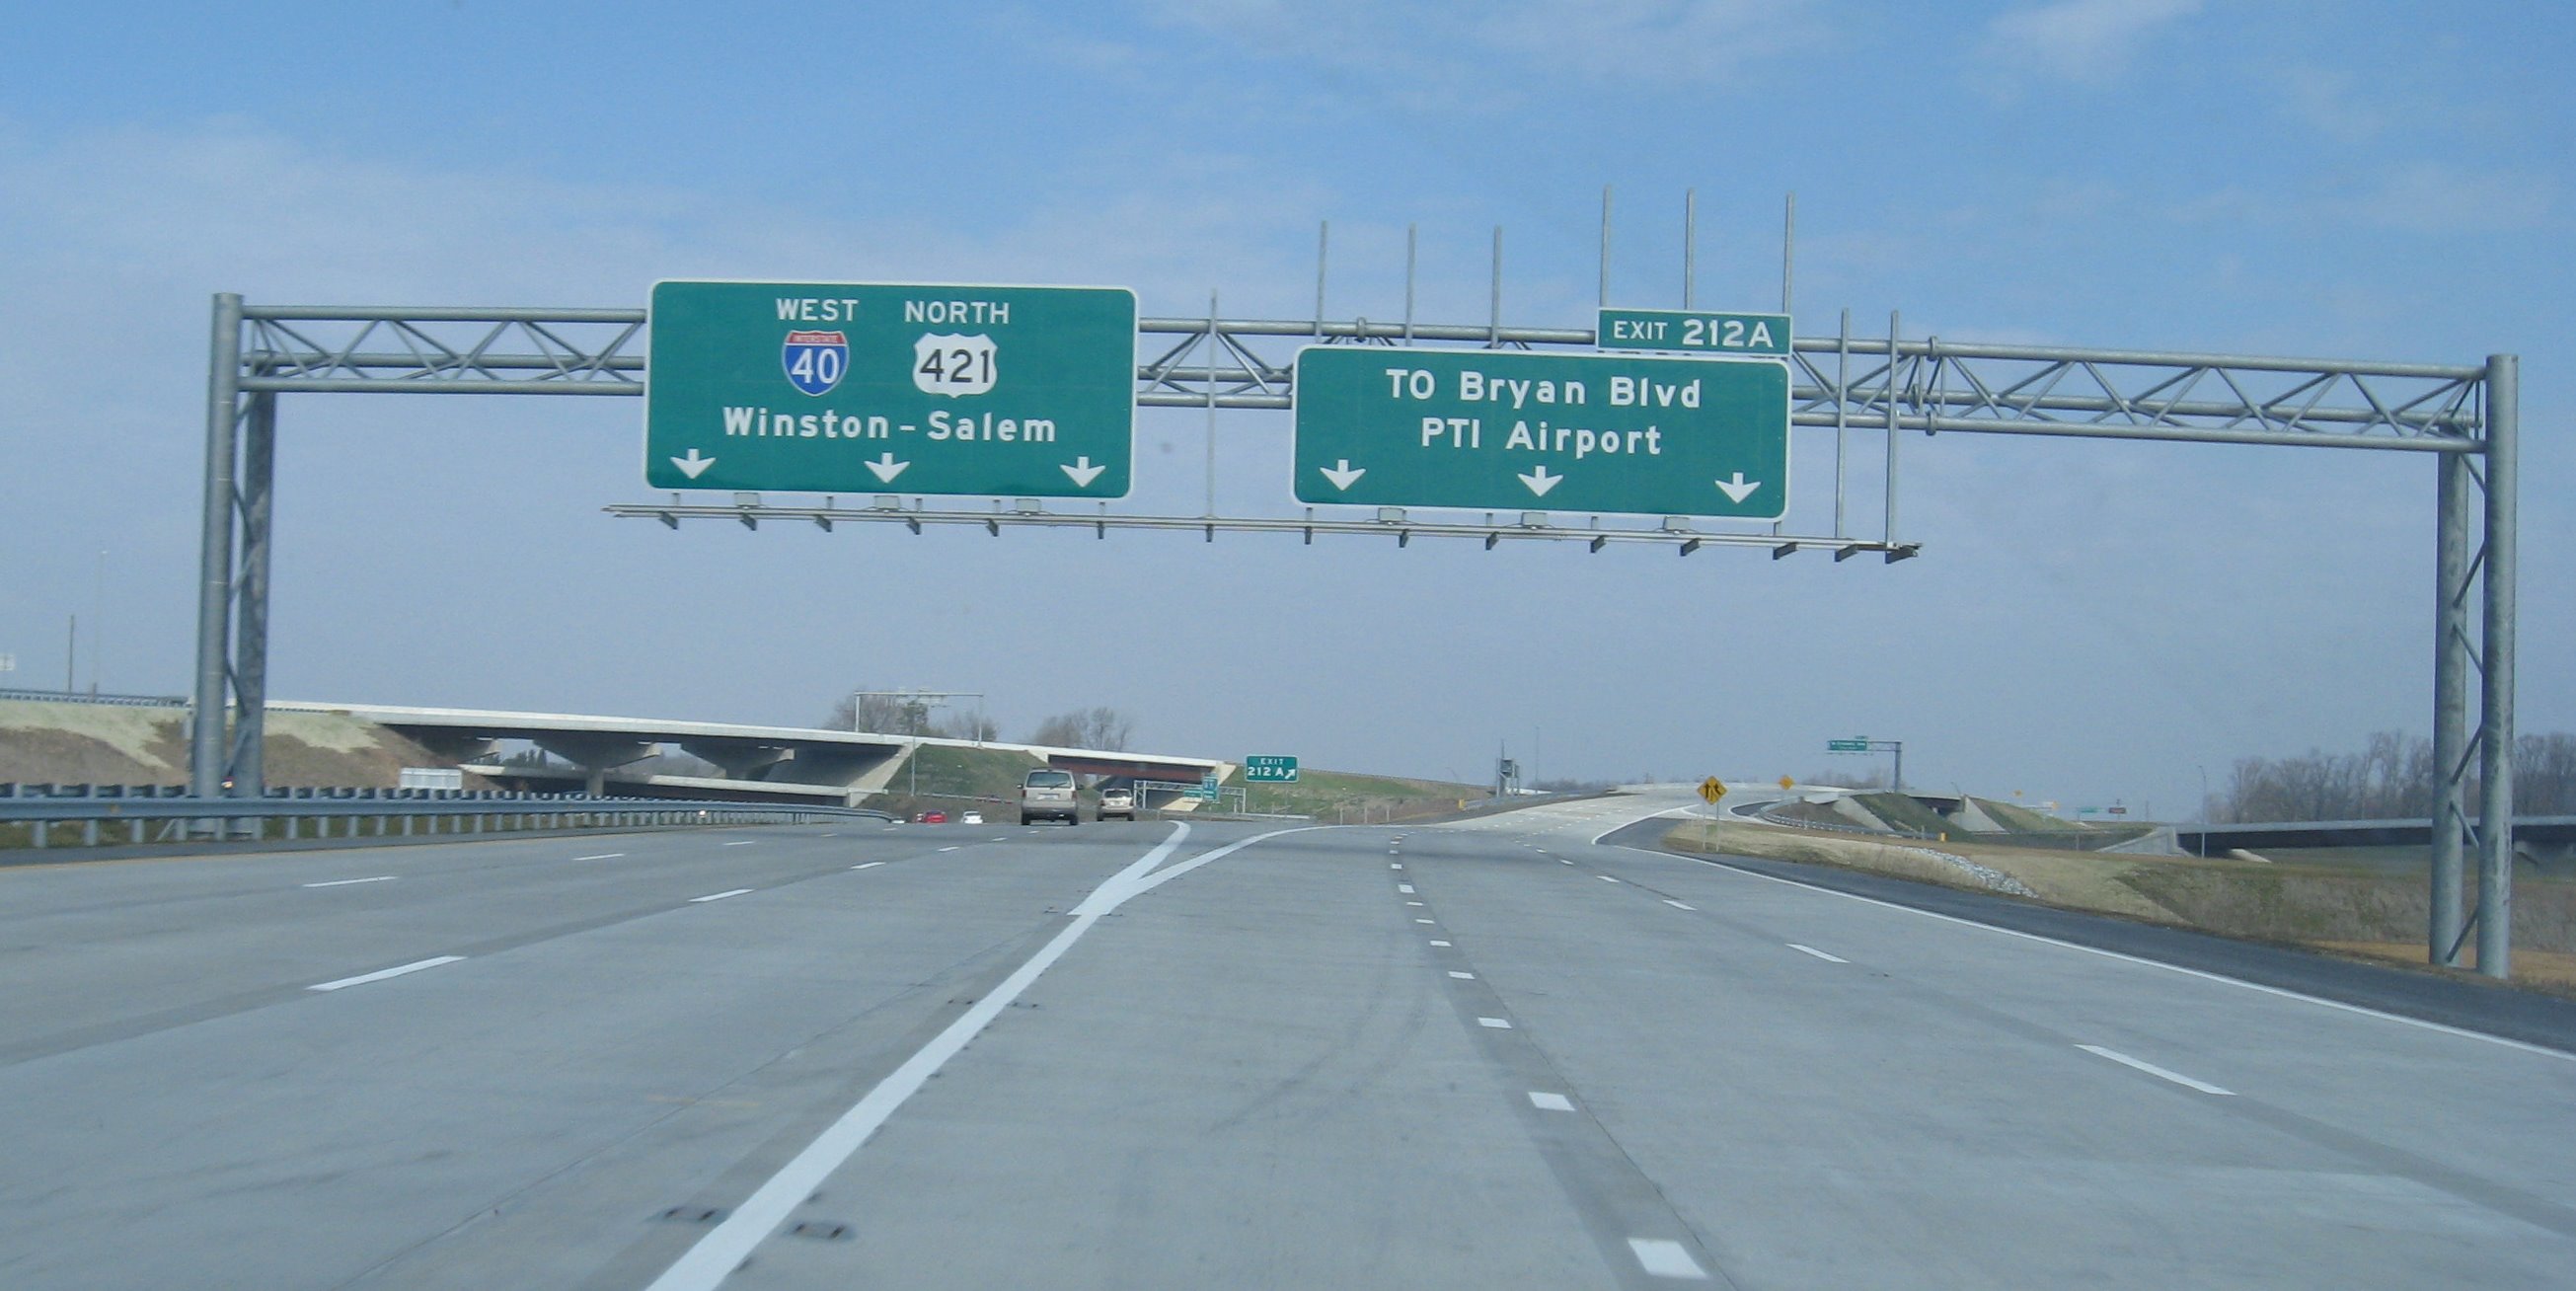 Image taken of signage at I-40 exit off of I-73 Greensboro Loop North in 2008